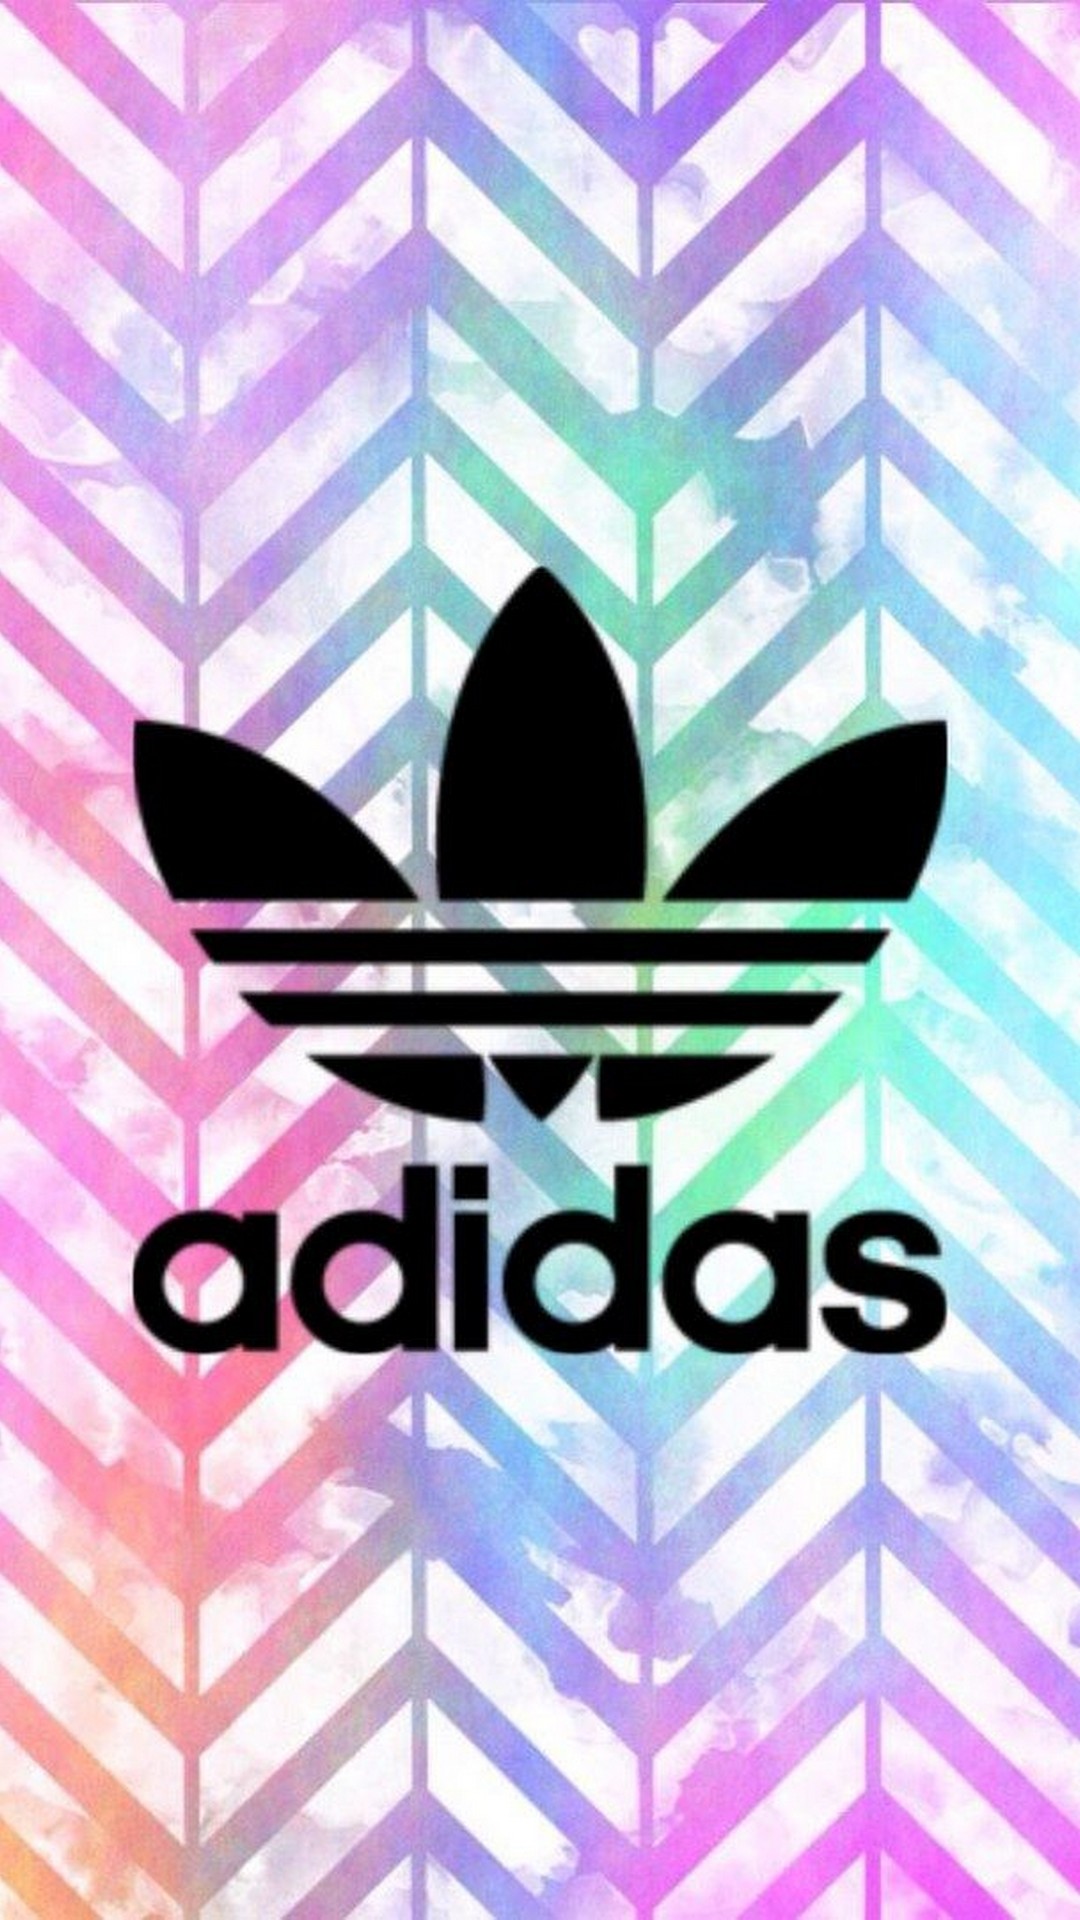 Adidas Phone Wallpaper with high-resolution 1080x1920 pixel. Download all Mobile Wallpapers and Use them as wallpapers for your iPhone, Tablet, iPad, Android and other mobile devices